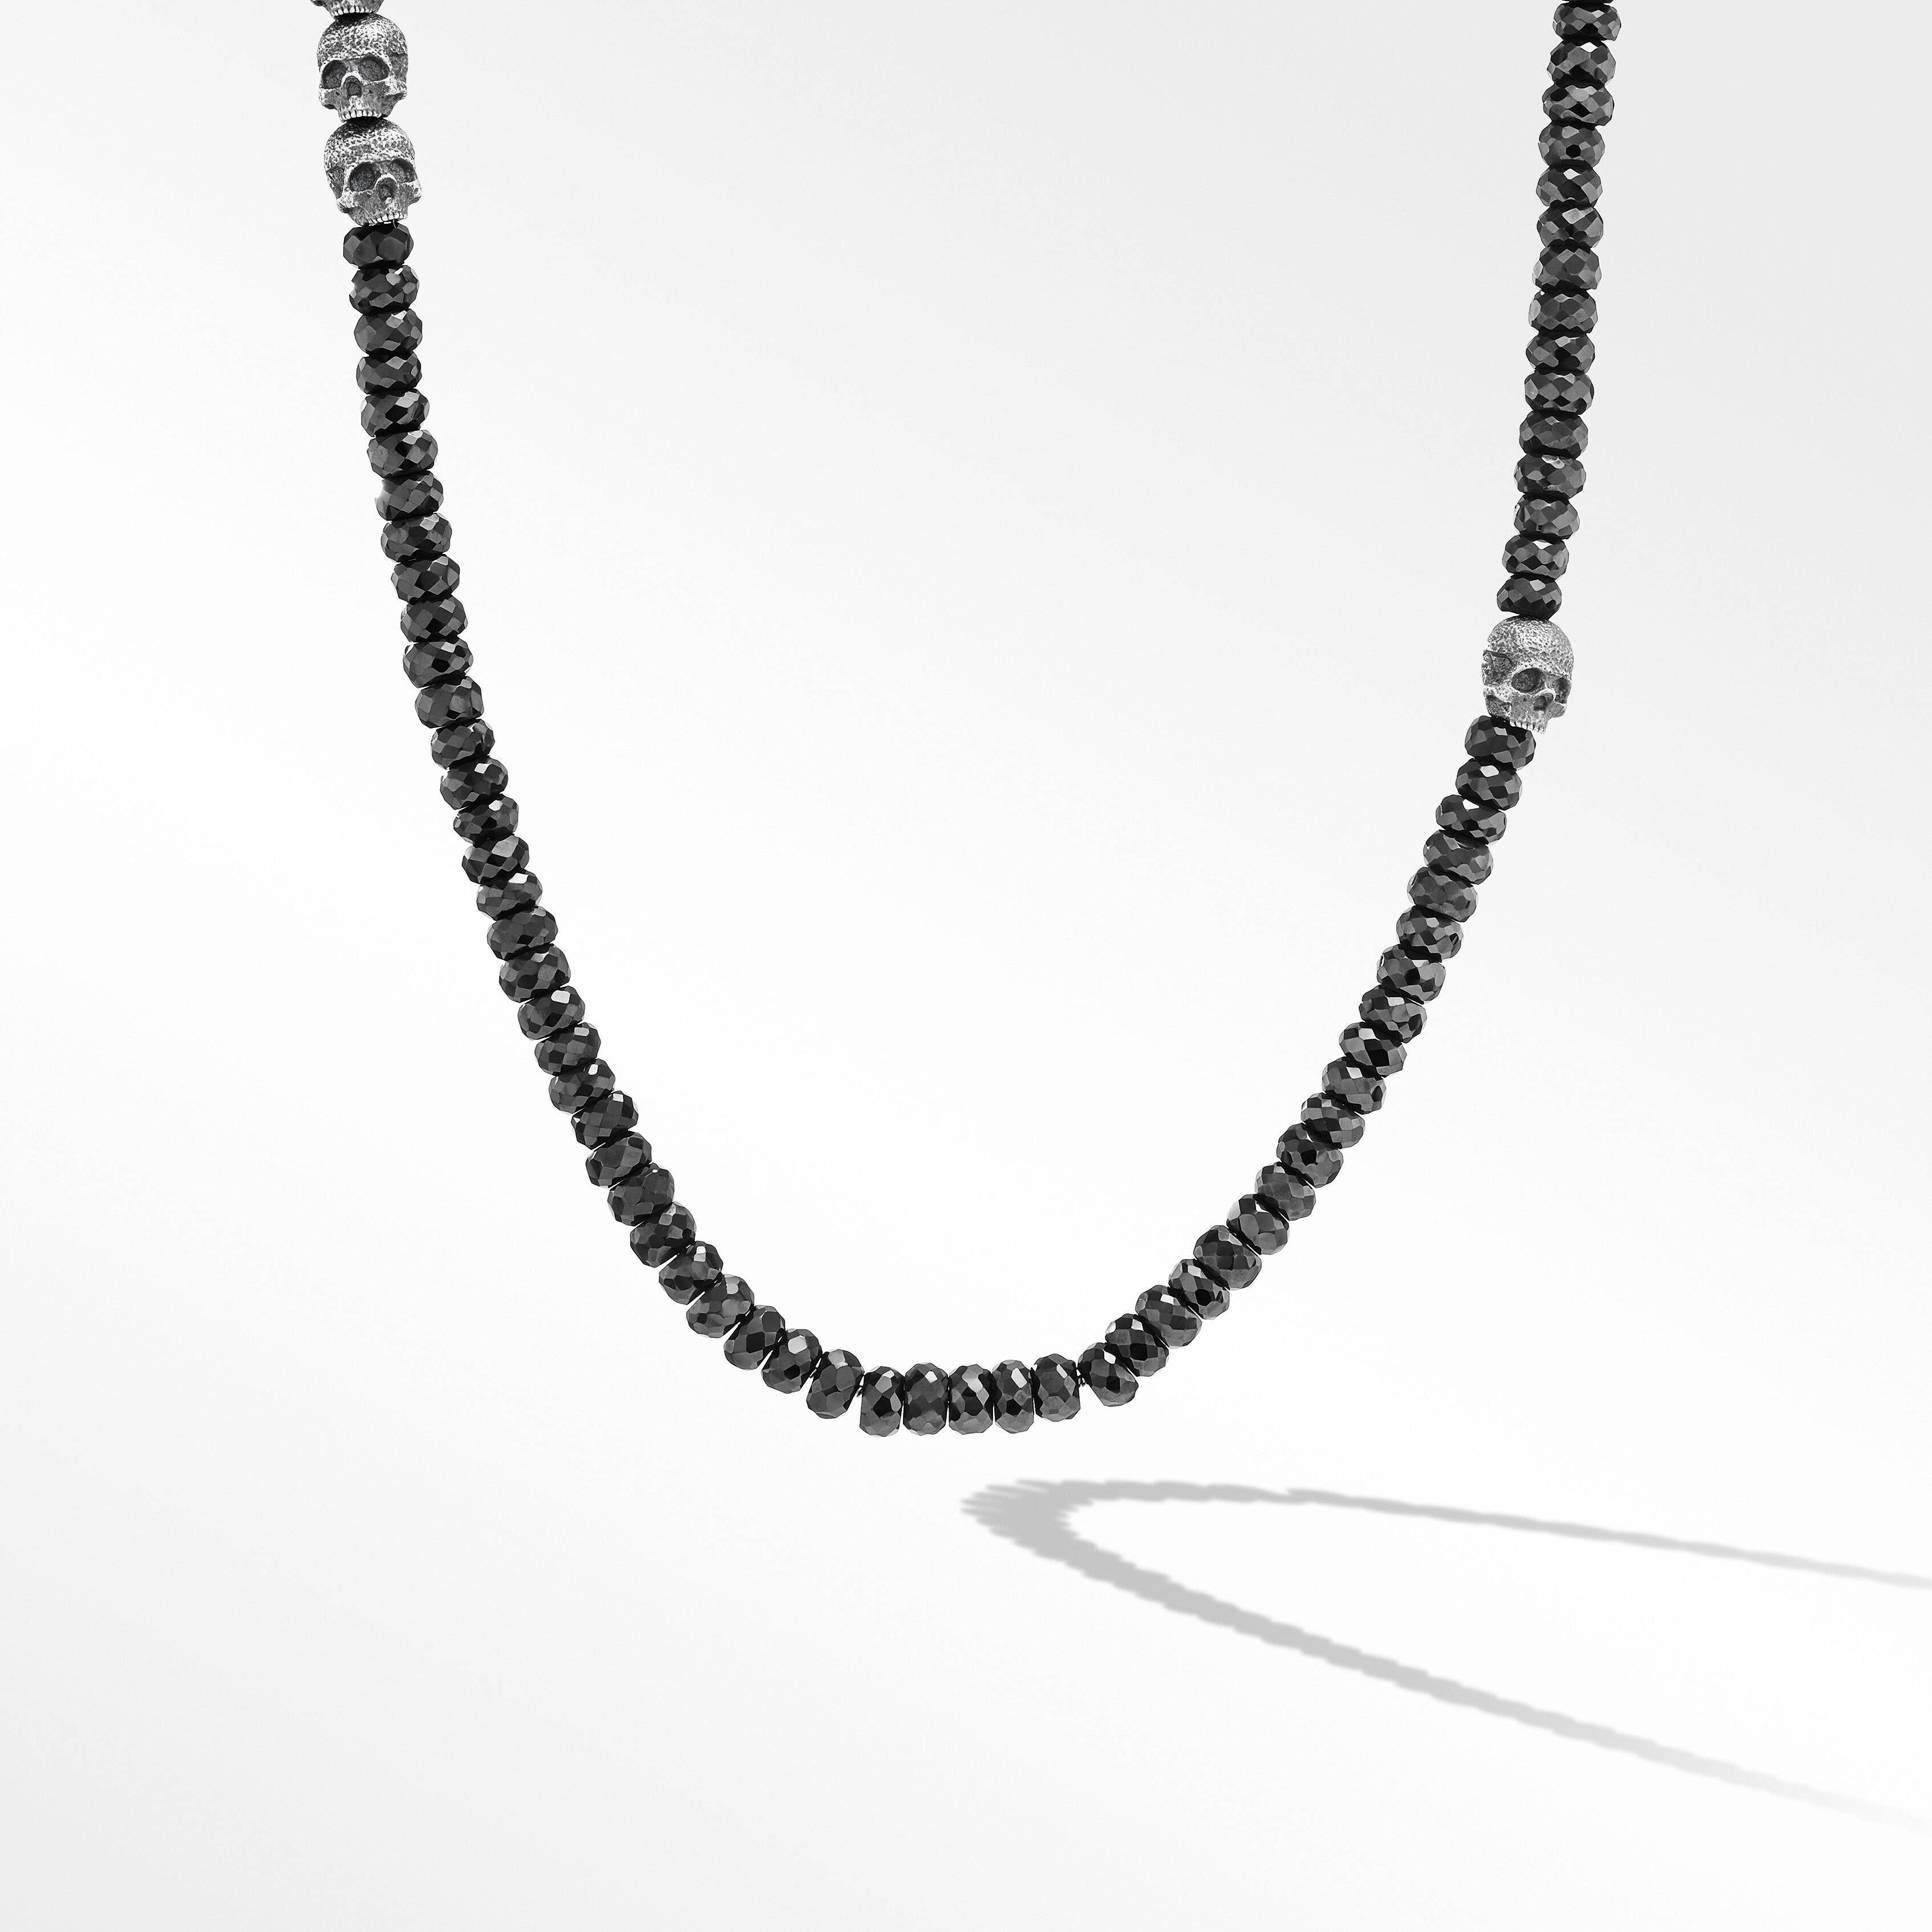 Memento Mori Skull Station Necklace in Sterling Silver with Black Spinel